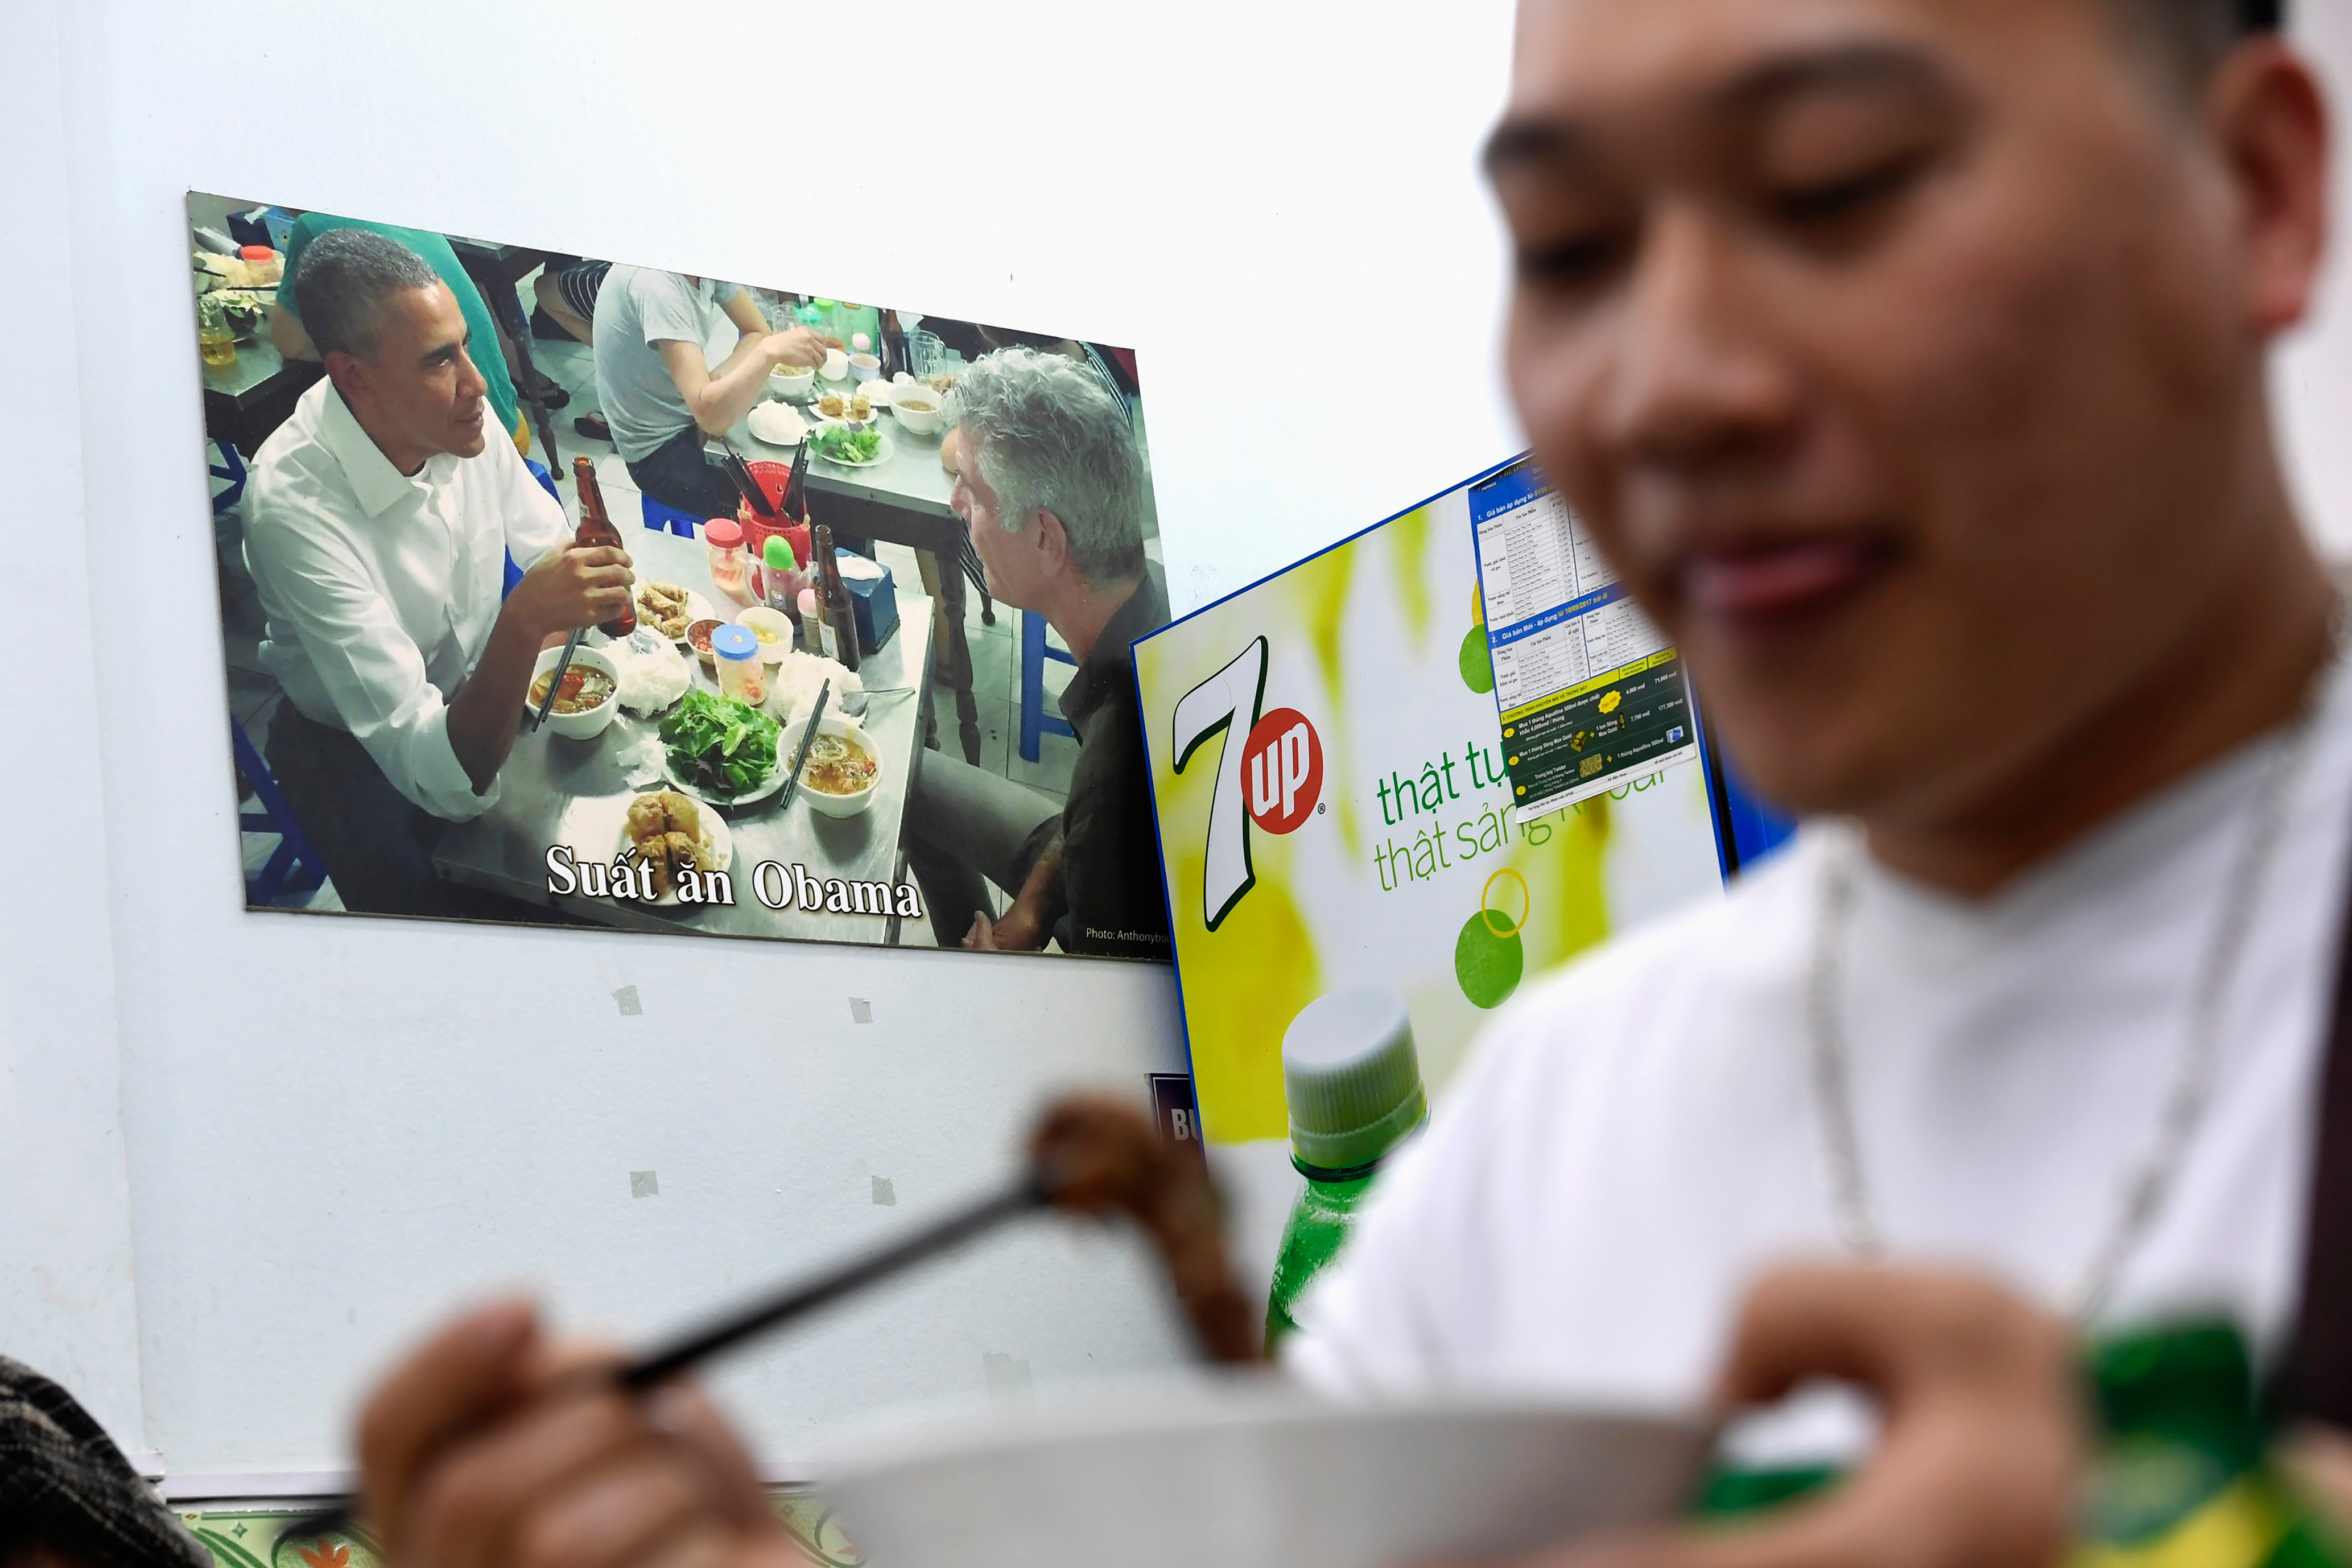 In this photograph taken on March 20, 2018, a customer enjoys a meal at Bun Cha Huong Lien restaurant, now dubbed "bun cha Obama" with a photograph of former U.S. President Barack Obama displayed on the wall, in Hanoi's old quarter. (Nhac Nguyen—AFP/Getty Images)